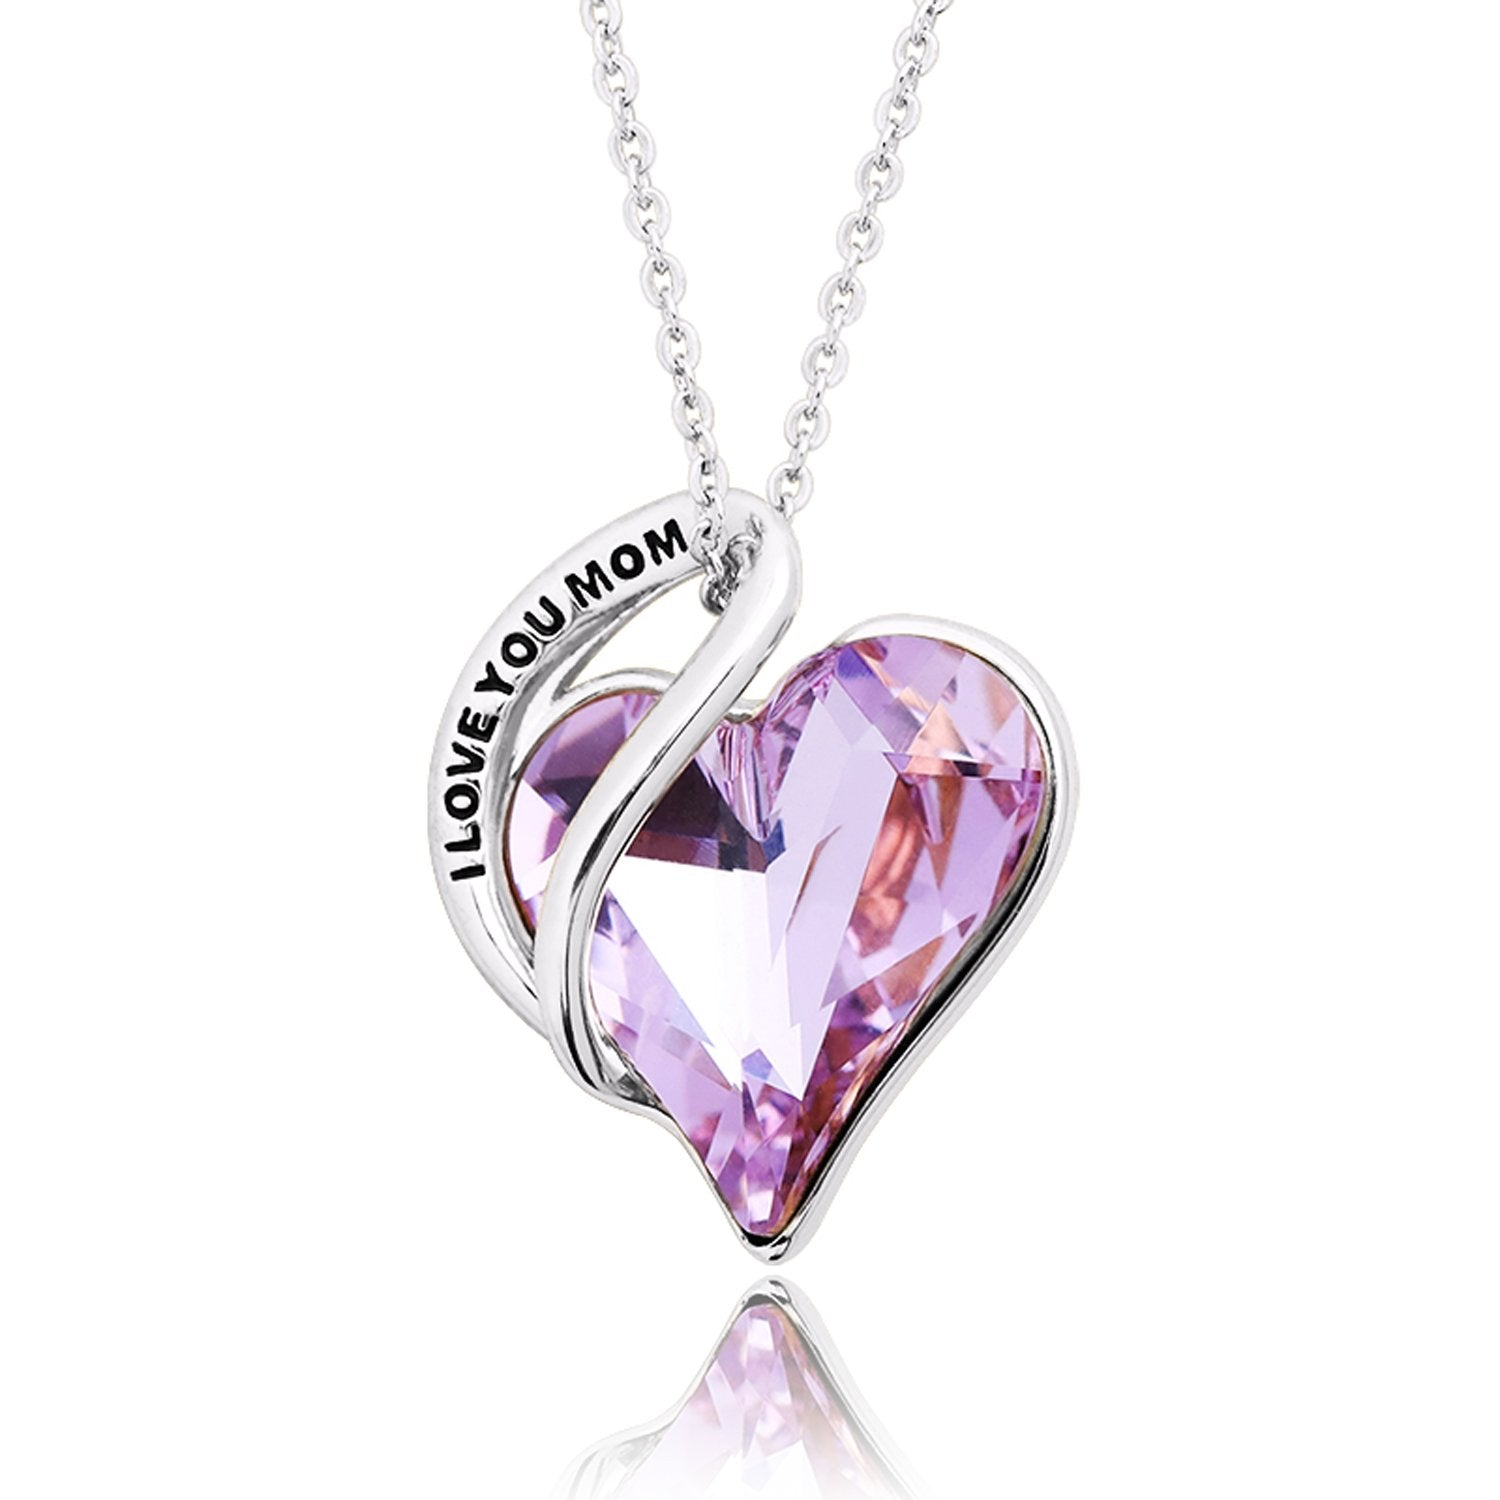 925 sterling silver Exquisite and elegant "I LOVE MOM" necklace